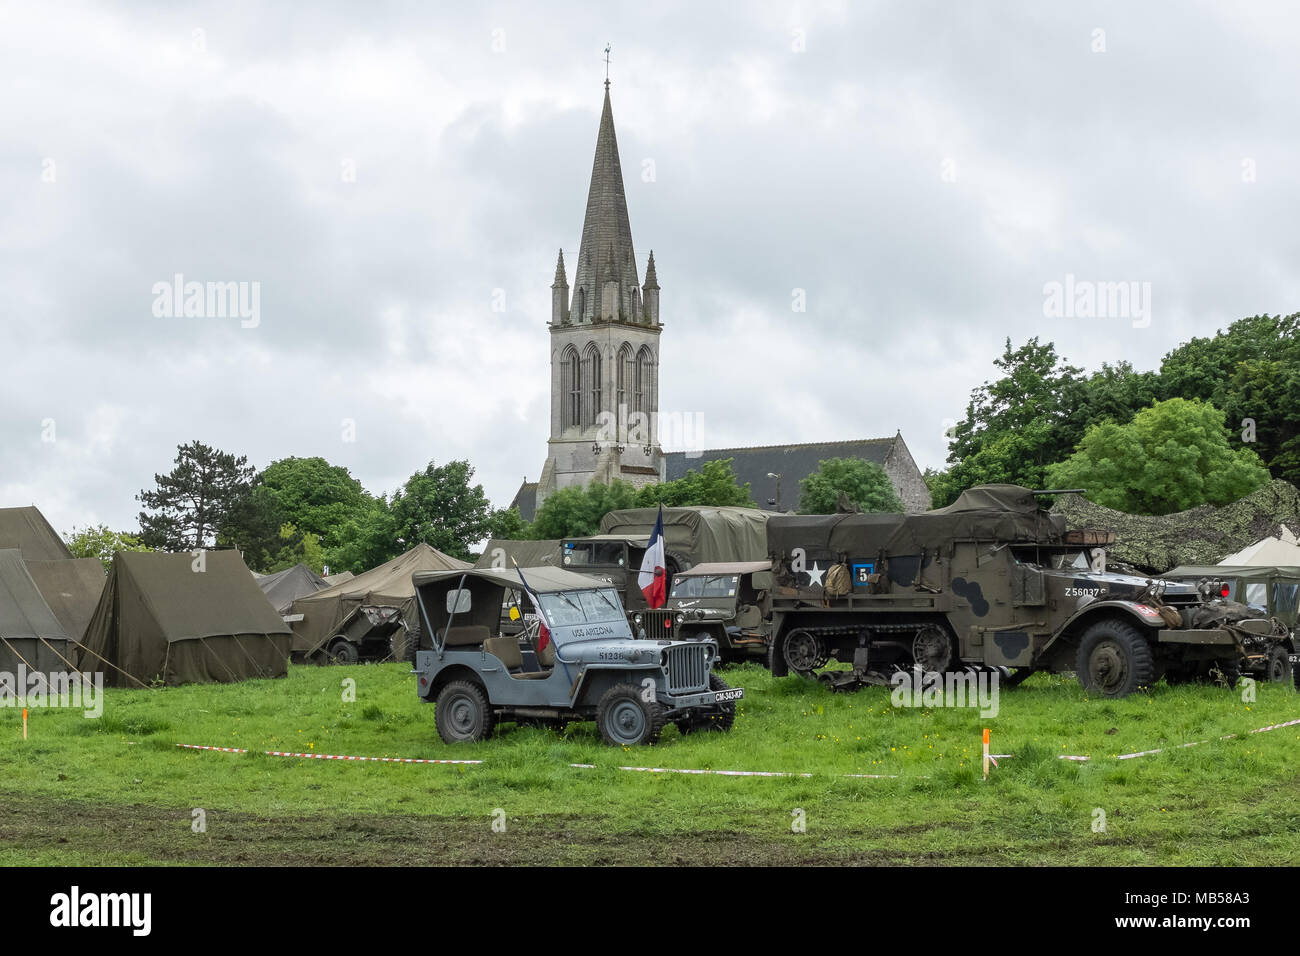 Colleville sur mer, France, Jun 4th 2014: re-enactment of military camp on the occasion of the anniversary of the Normandy landings. Stock Photo